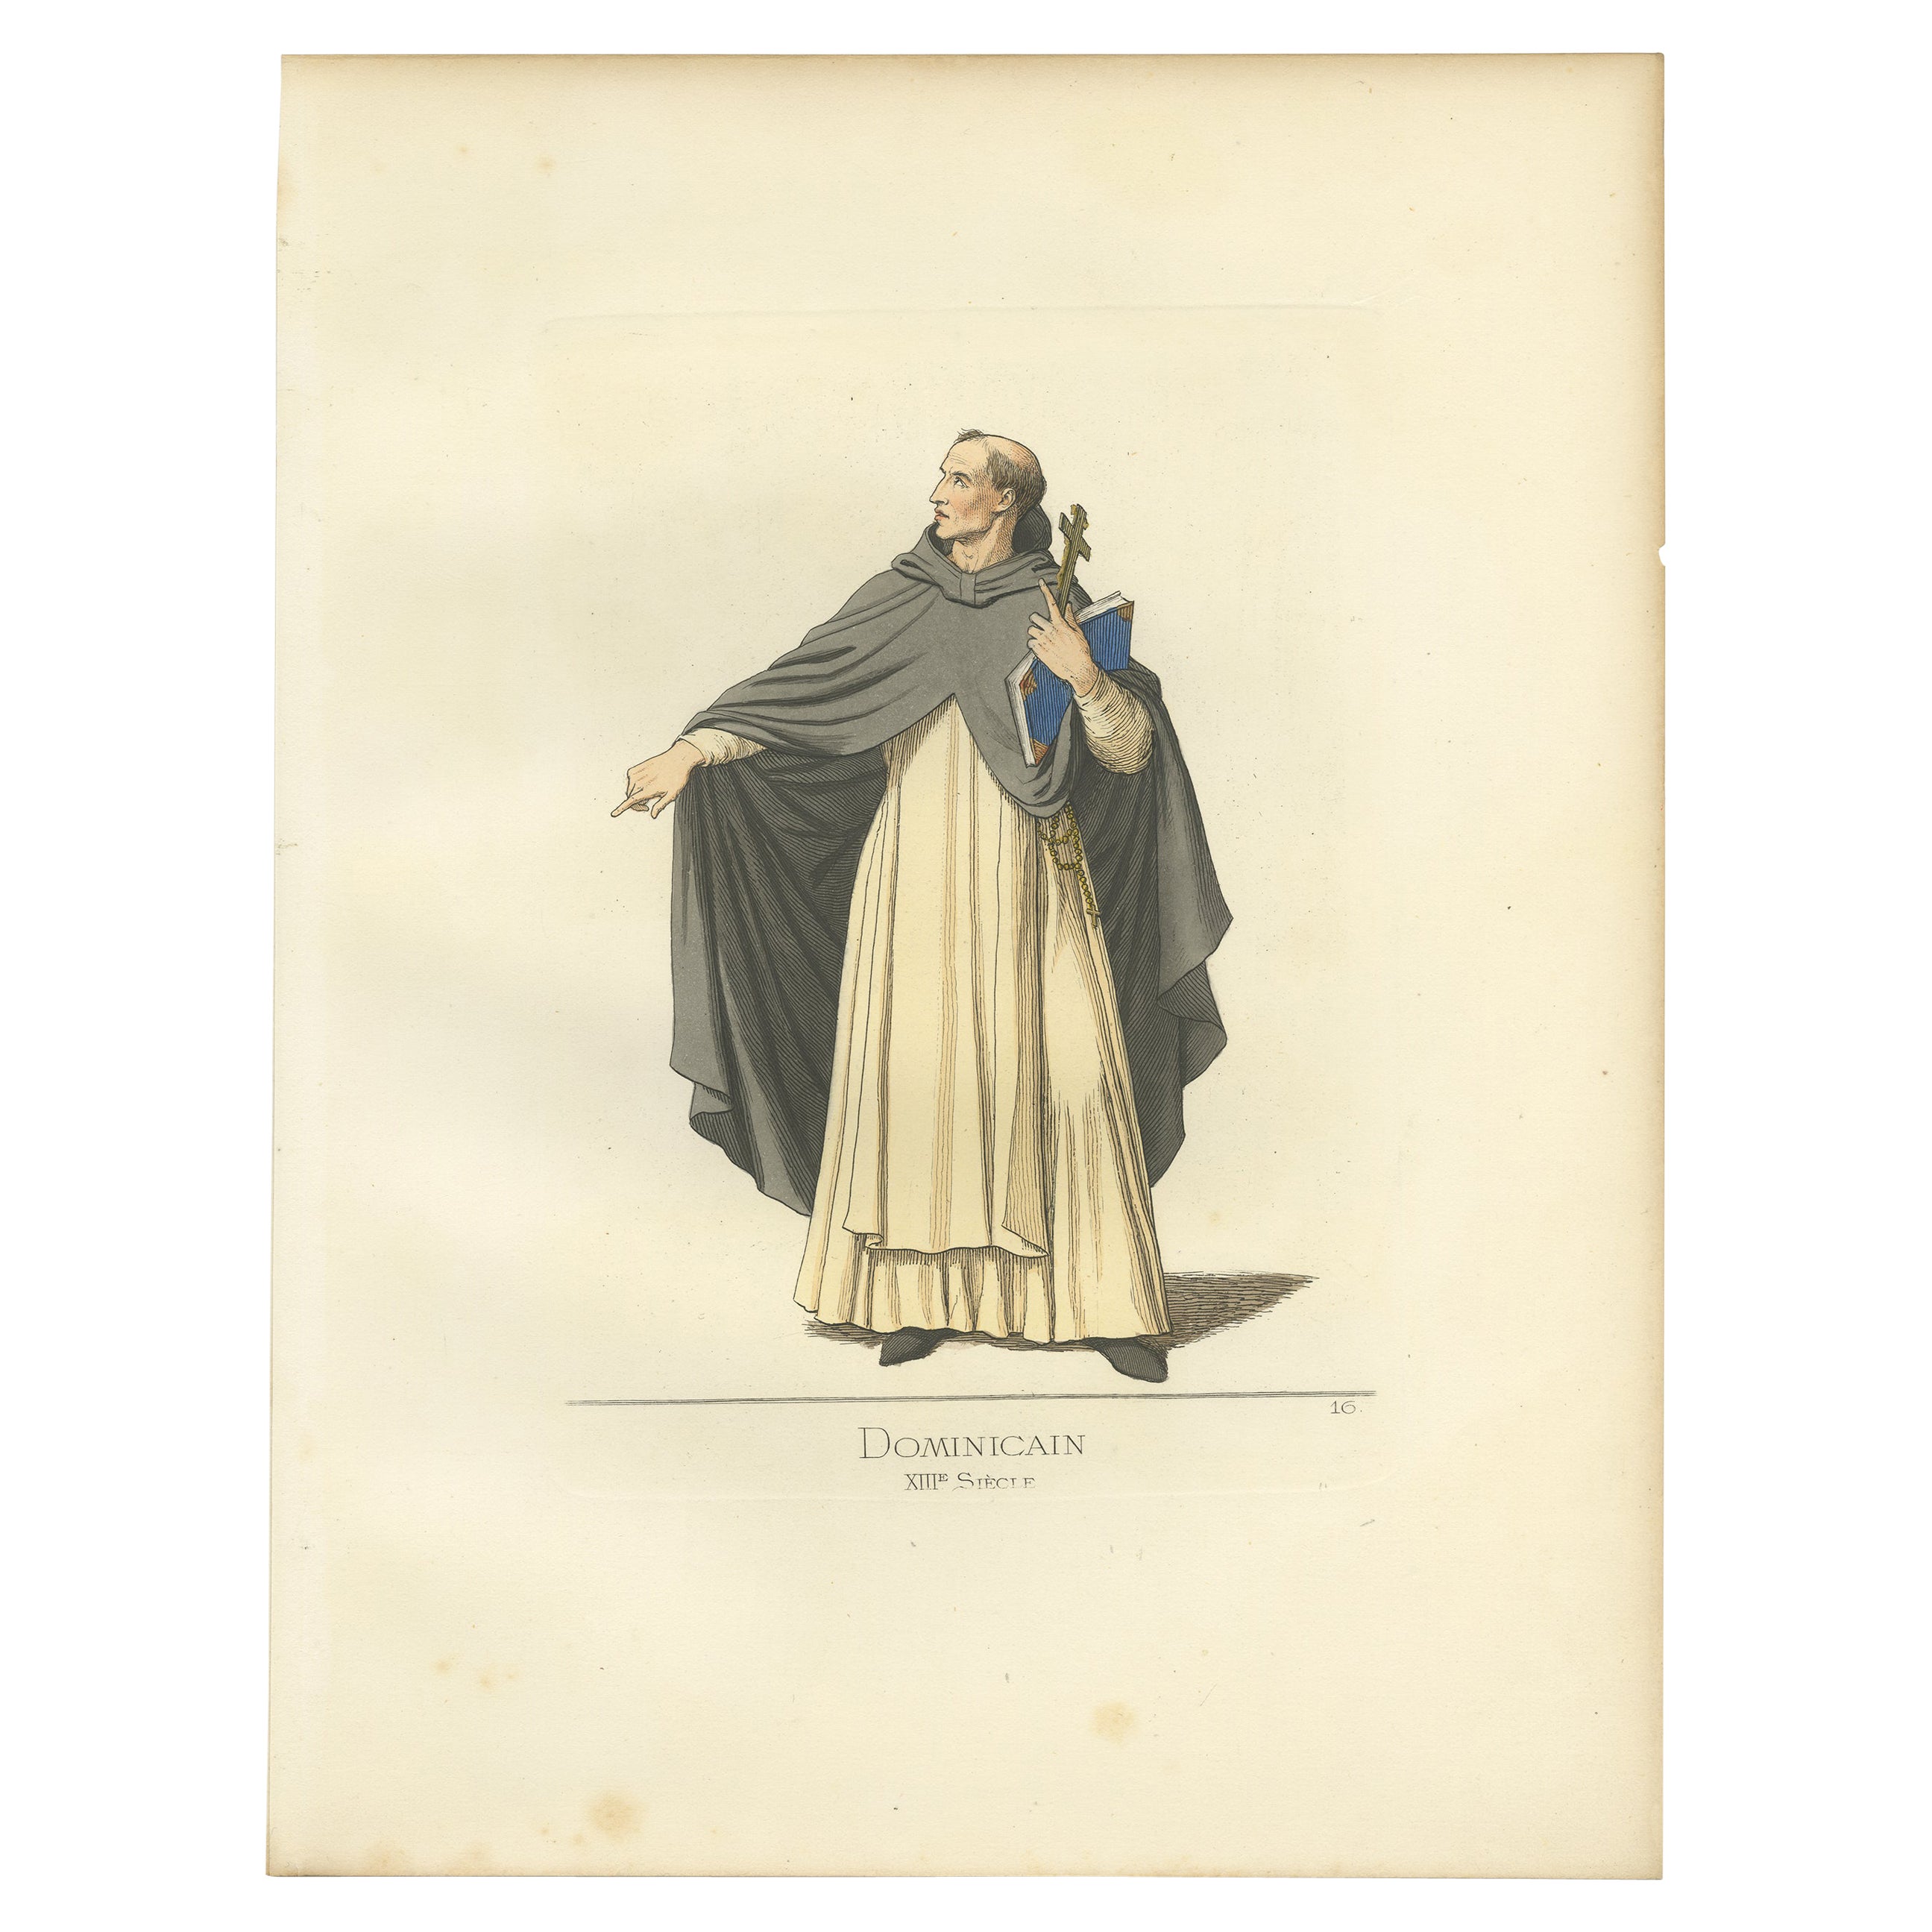 Antique Print of a Member of the Dominican Order by Bonnard, 1860